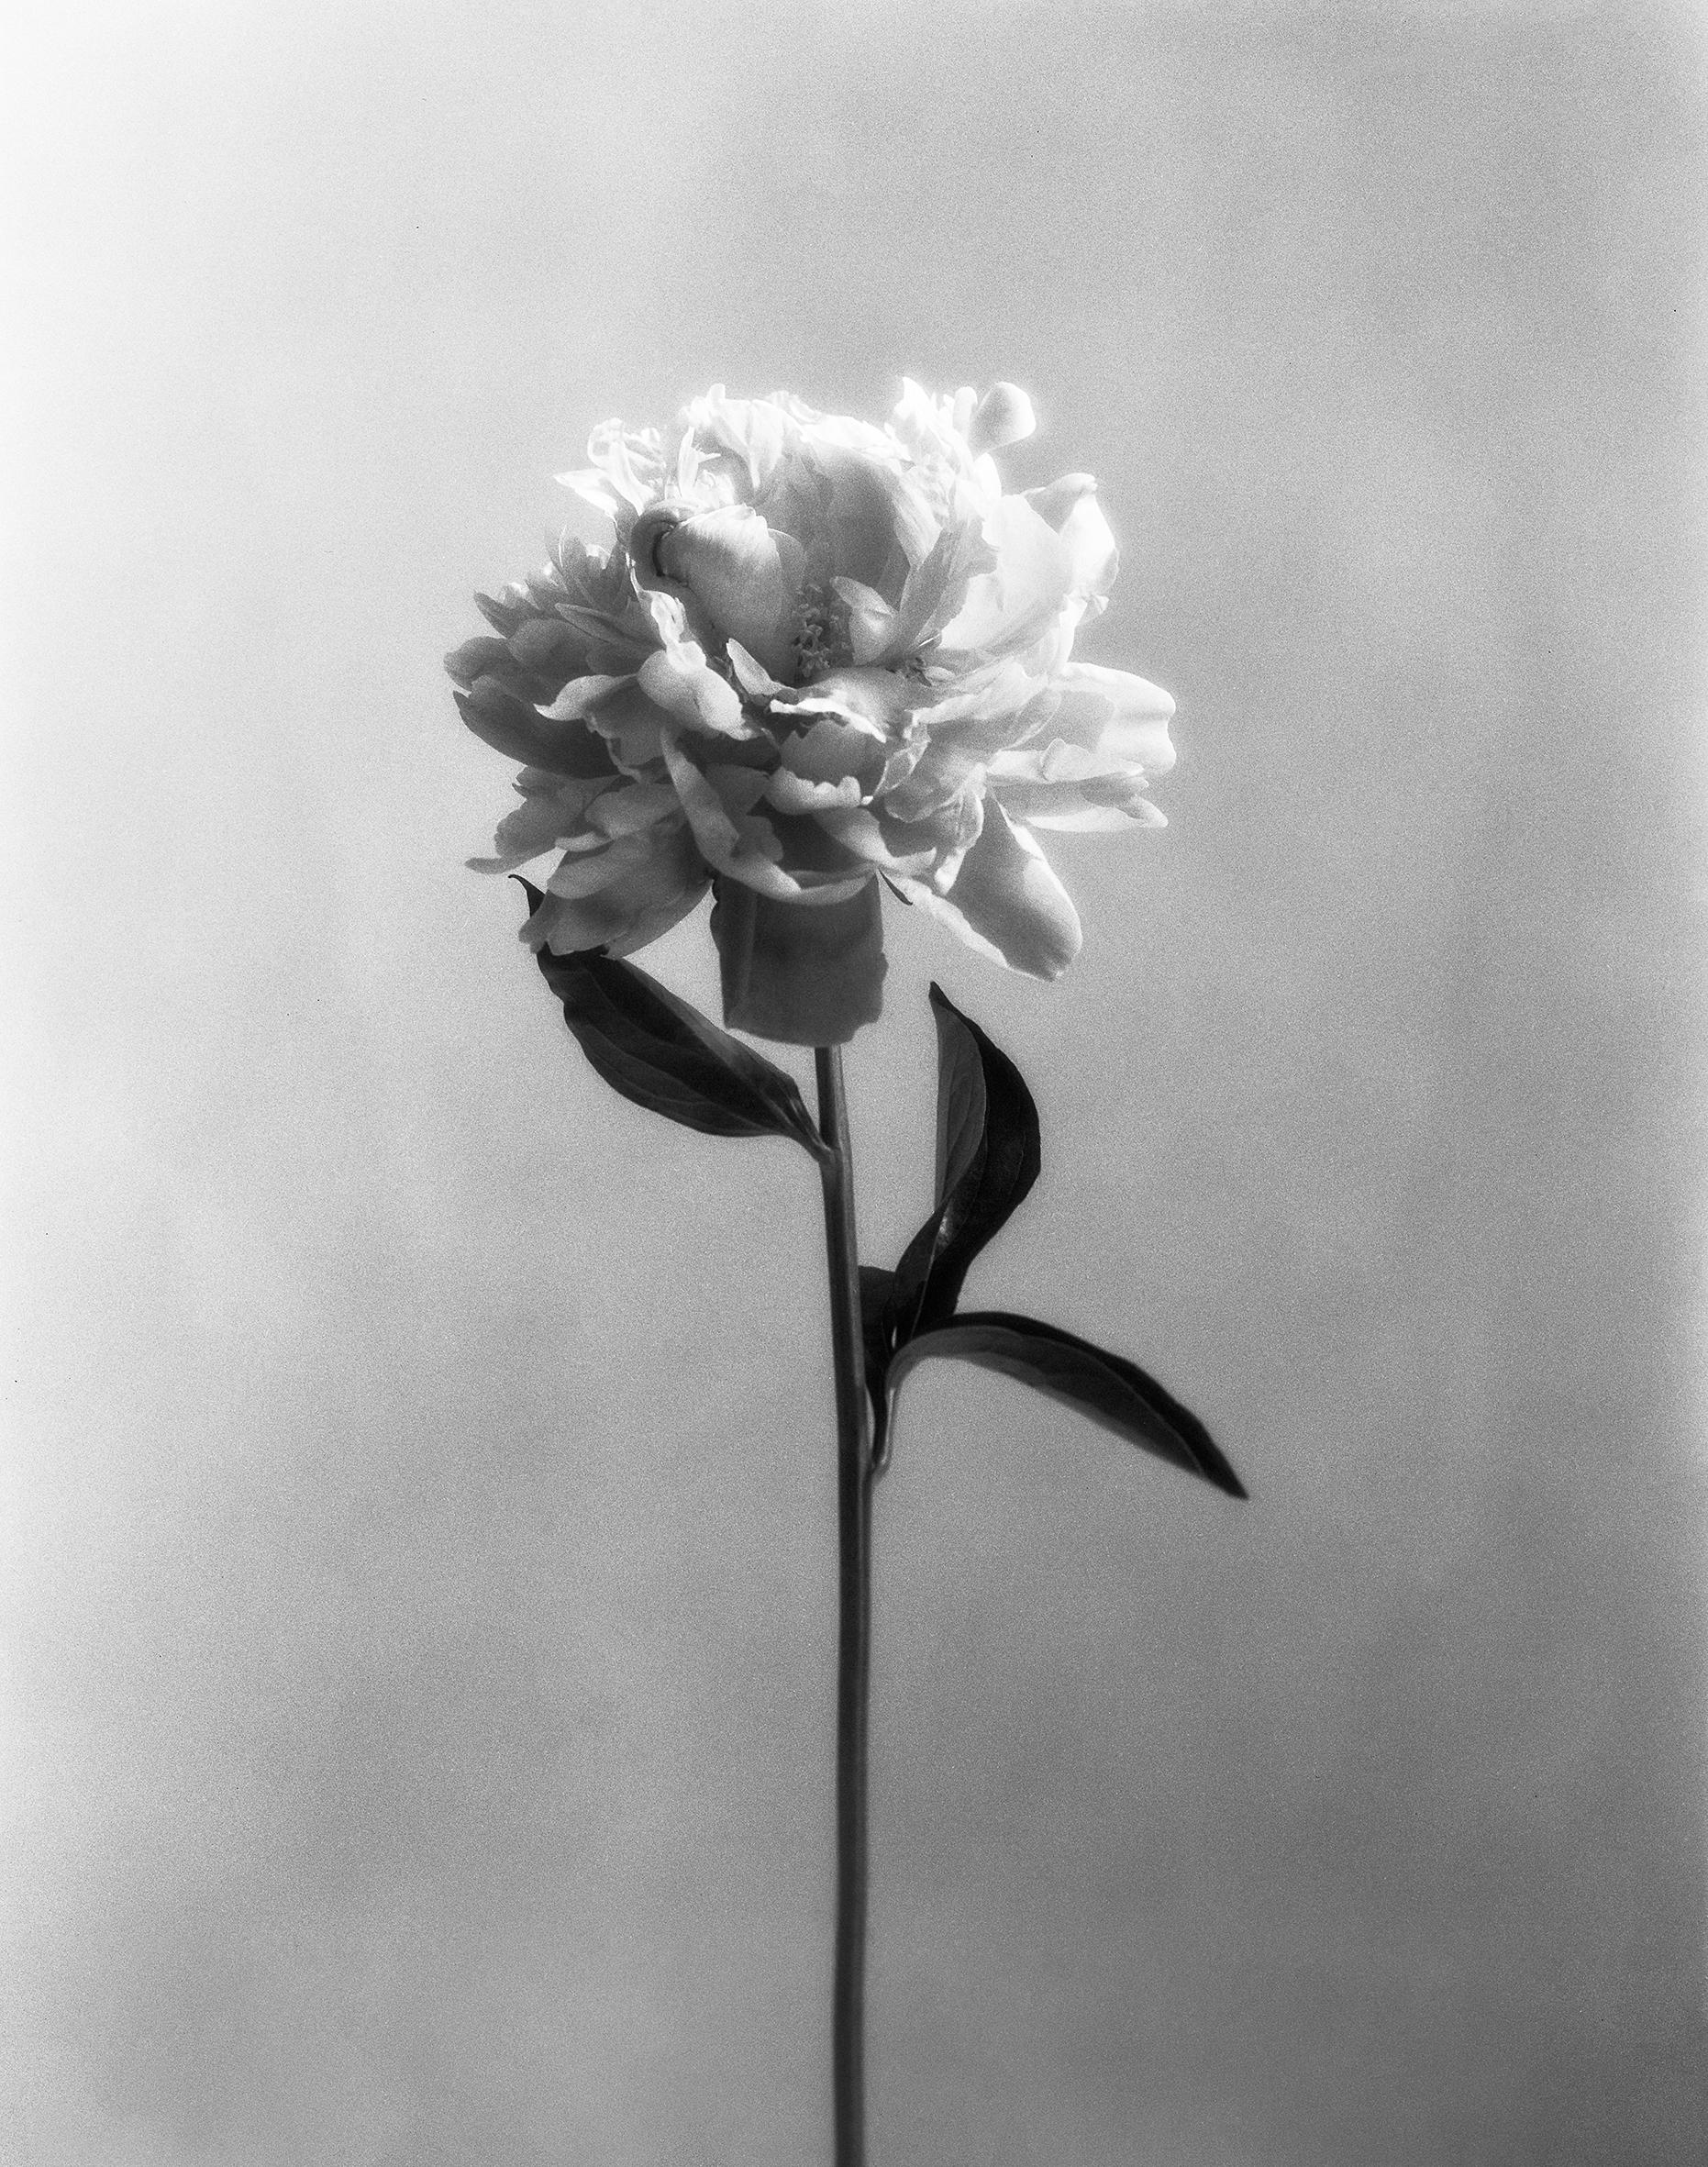 Ugne Pouwell Black and White Photograph - Peony no.4 - analogue black and white floral photography, limited edition 15